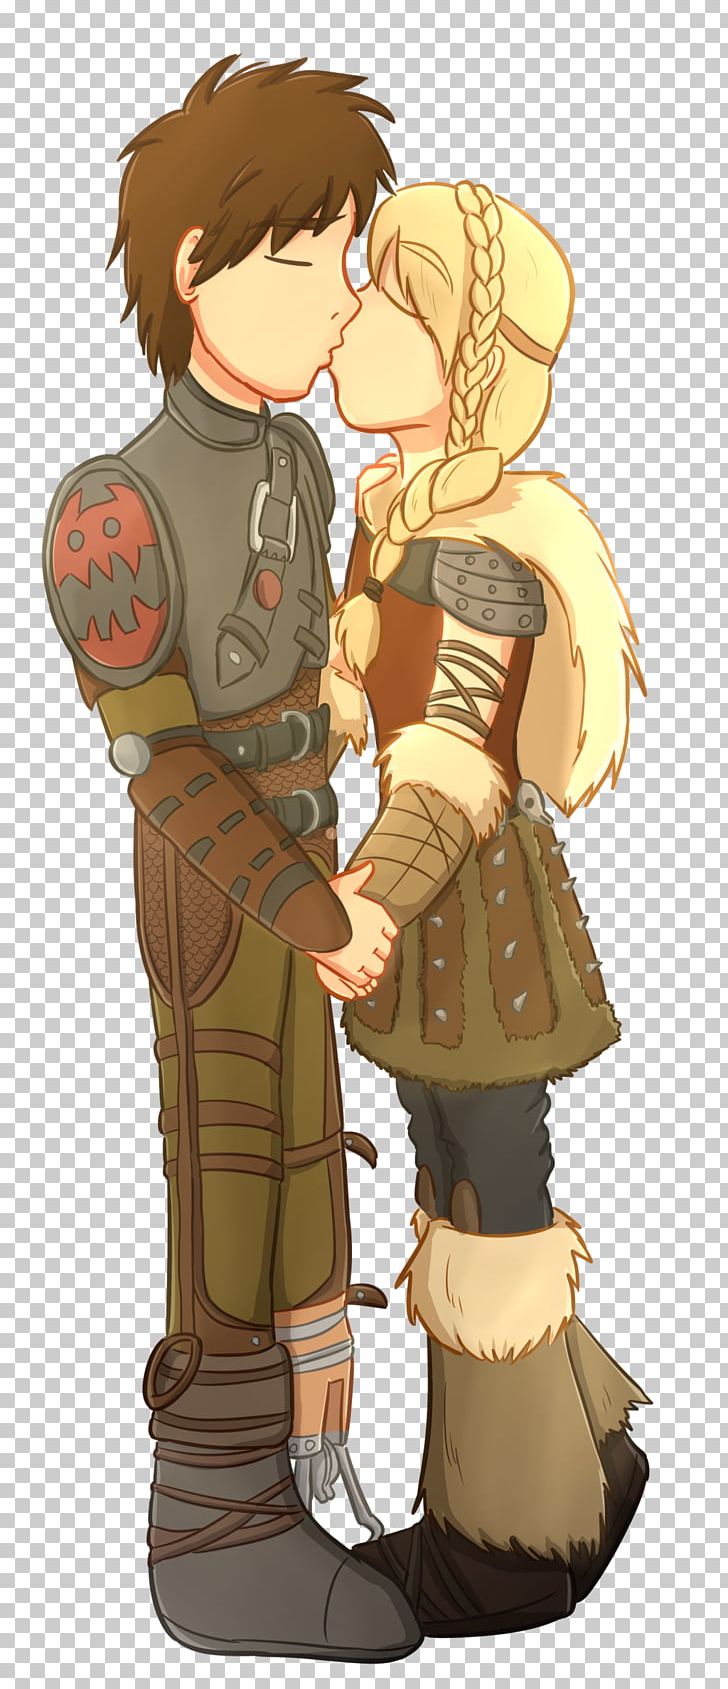 Hiccup Horrendous Haddock III Astrid Ruffnut How To Train Your Dragon PNG, Clipart, Anime, Arm, Art, Astrid, Boy Free PNG Download